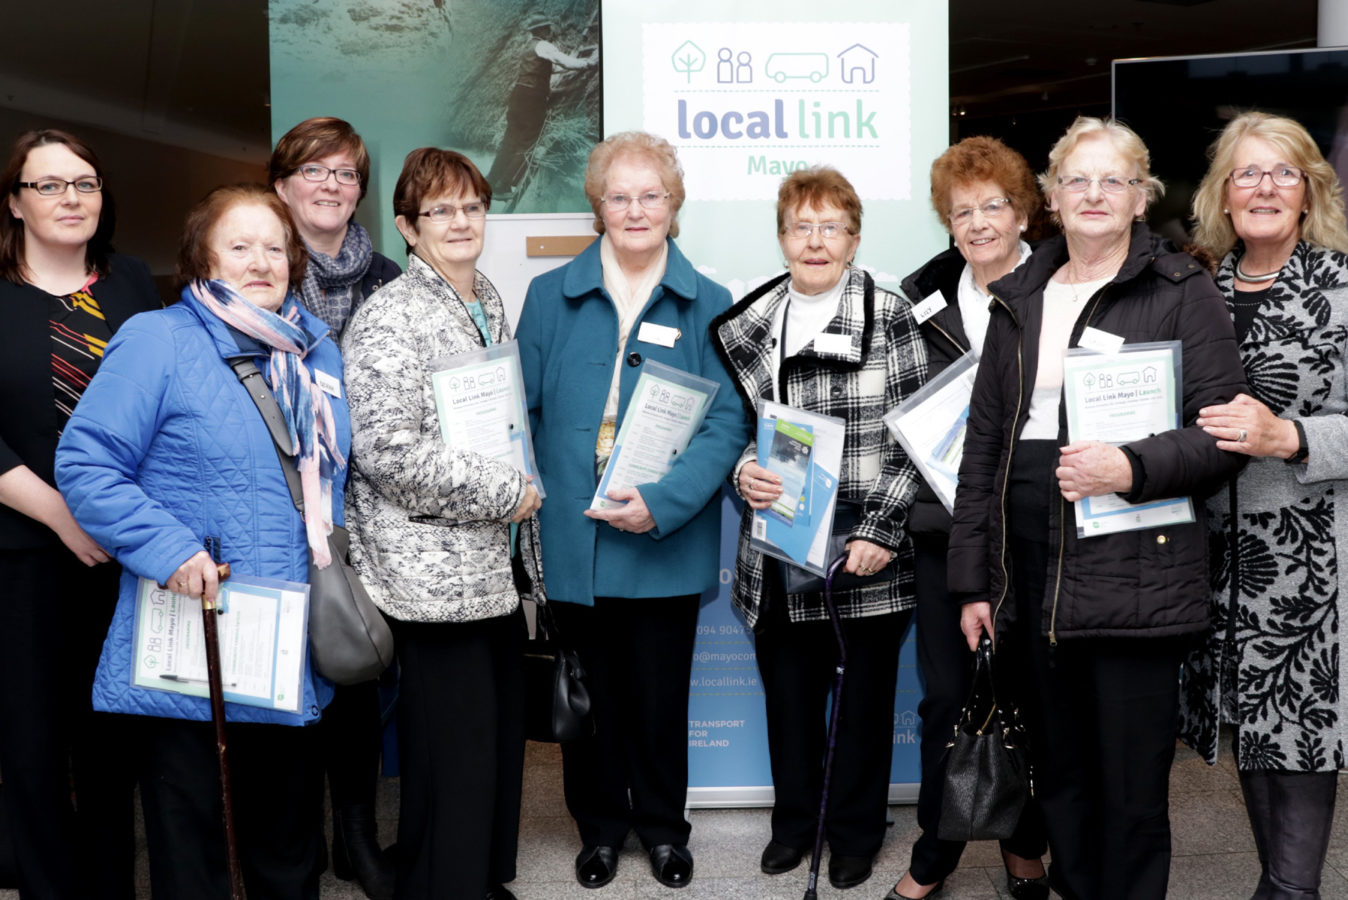 Pictured at the Launch of Local Link Mayo by Cllr Neil Cruise at the Museum of Country Life, Turlough, Castlebar are Guest Speaker Fiona Doocey and Members of  Comharchumann Forbartha Cill agus Seadhna Teo, Geesala of  Nora Gaughan, Caroline McDonagh, Lilly Mangan, Annie Munnelly, Maura McDonagh, Ann McGuire, Mary O'Connell, Sadie Kenney and Mary Sweeney. Pic: Heverin Print.